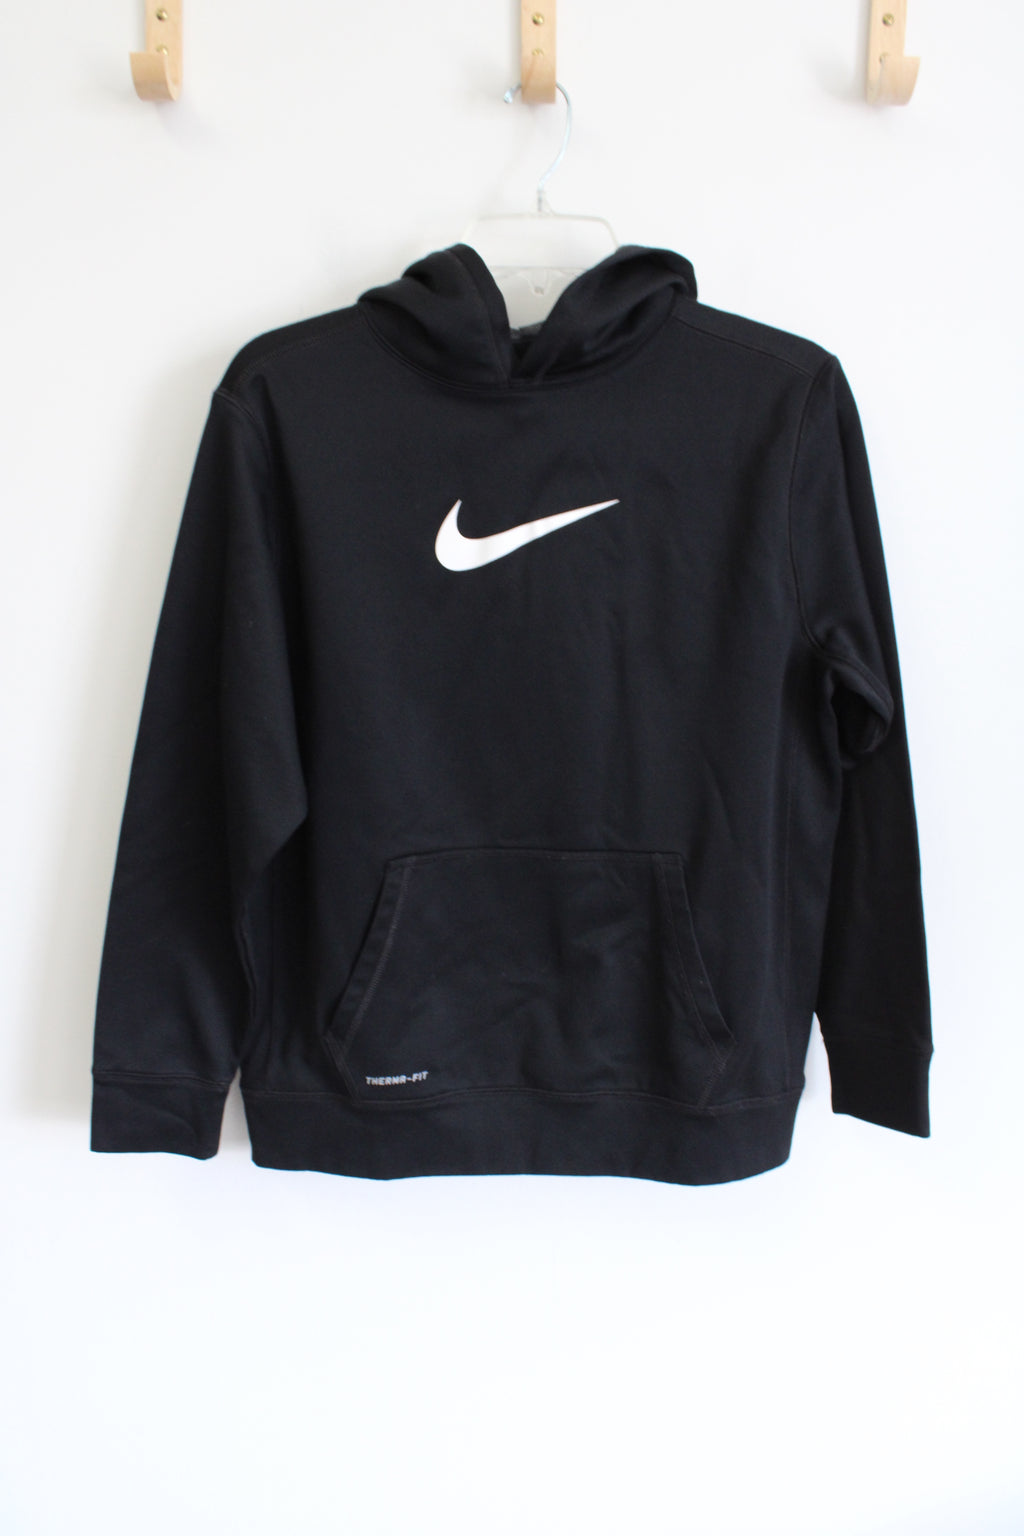 Nike Therma-Fit Black Logo Fleece Lined Hoodie | Youth XL (18/20)